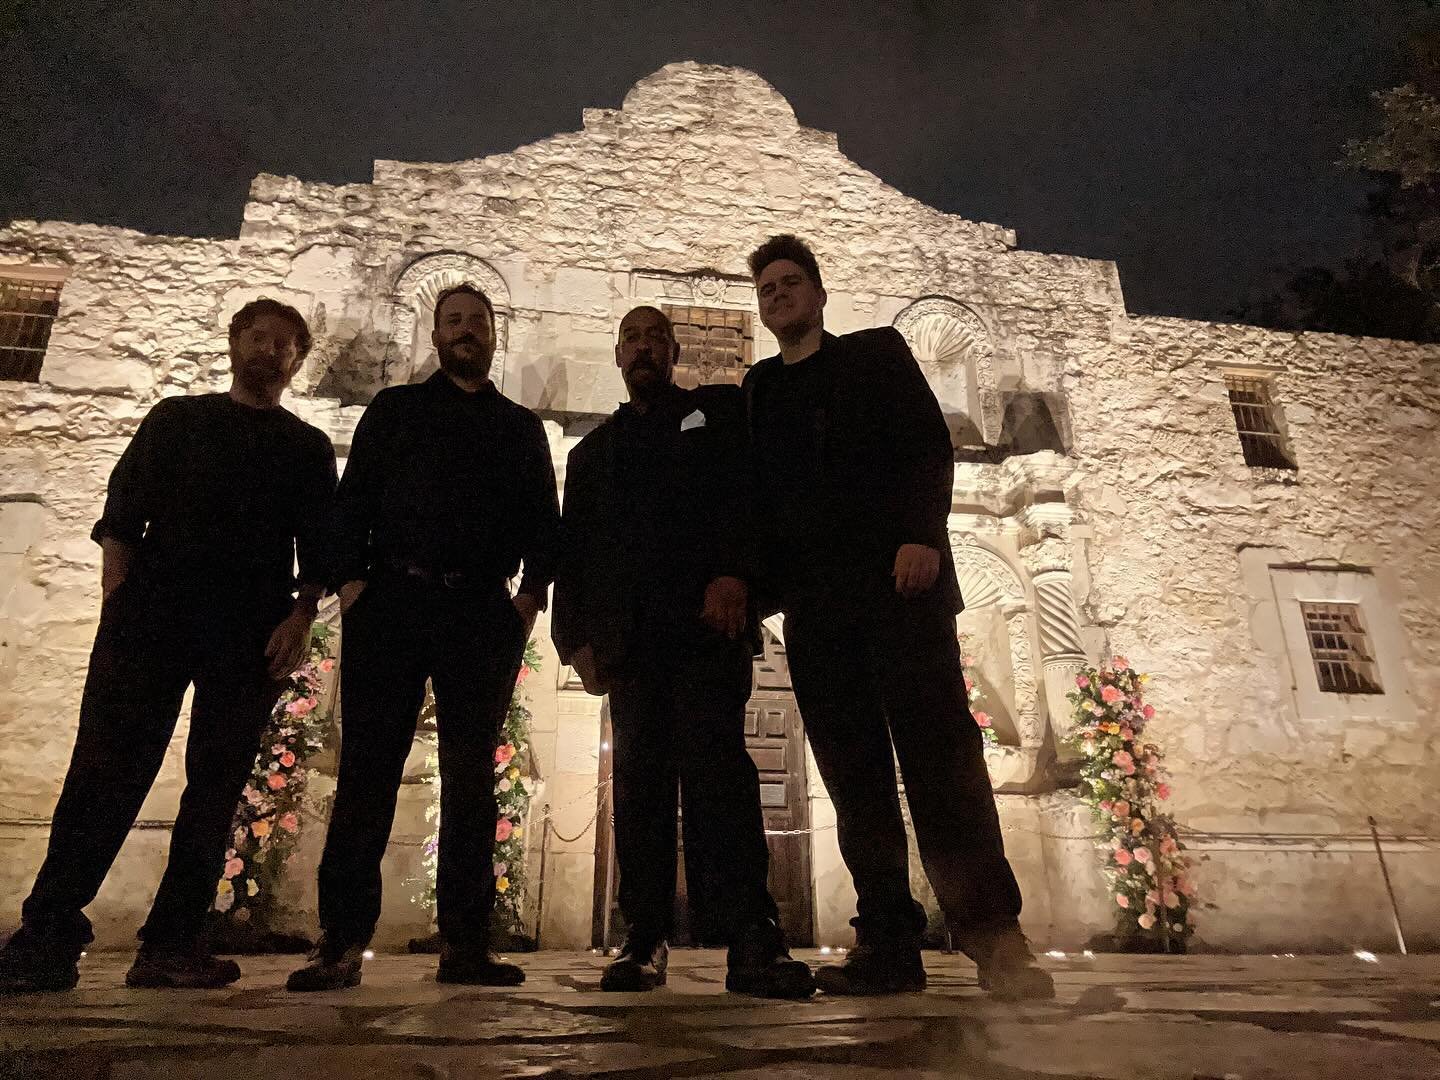 Basement at The Alamo wasn&rsquo;t open so here&rsquo;s a pic of the crew tonight. Wedding gig, had a blast!